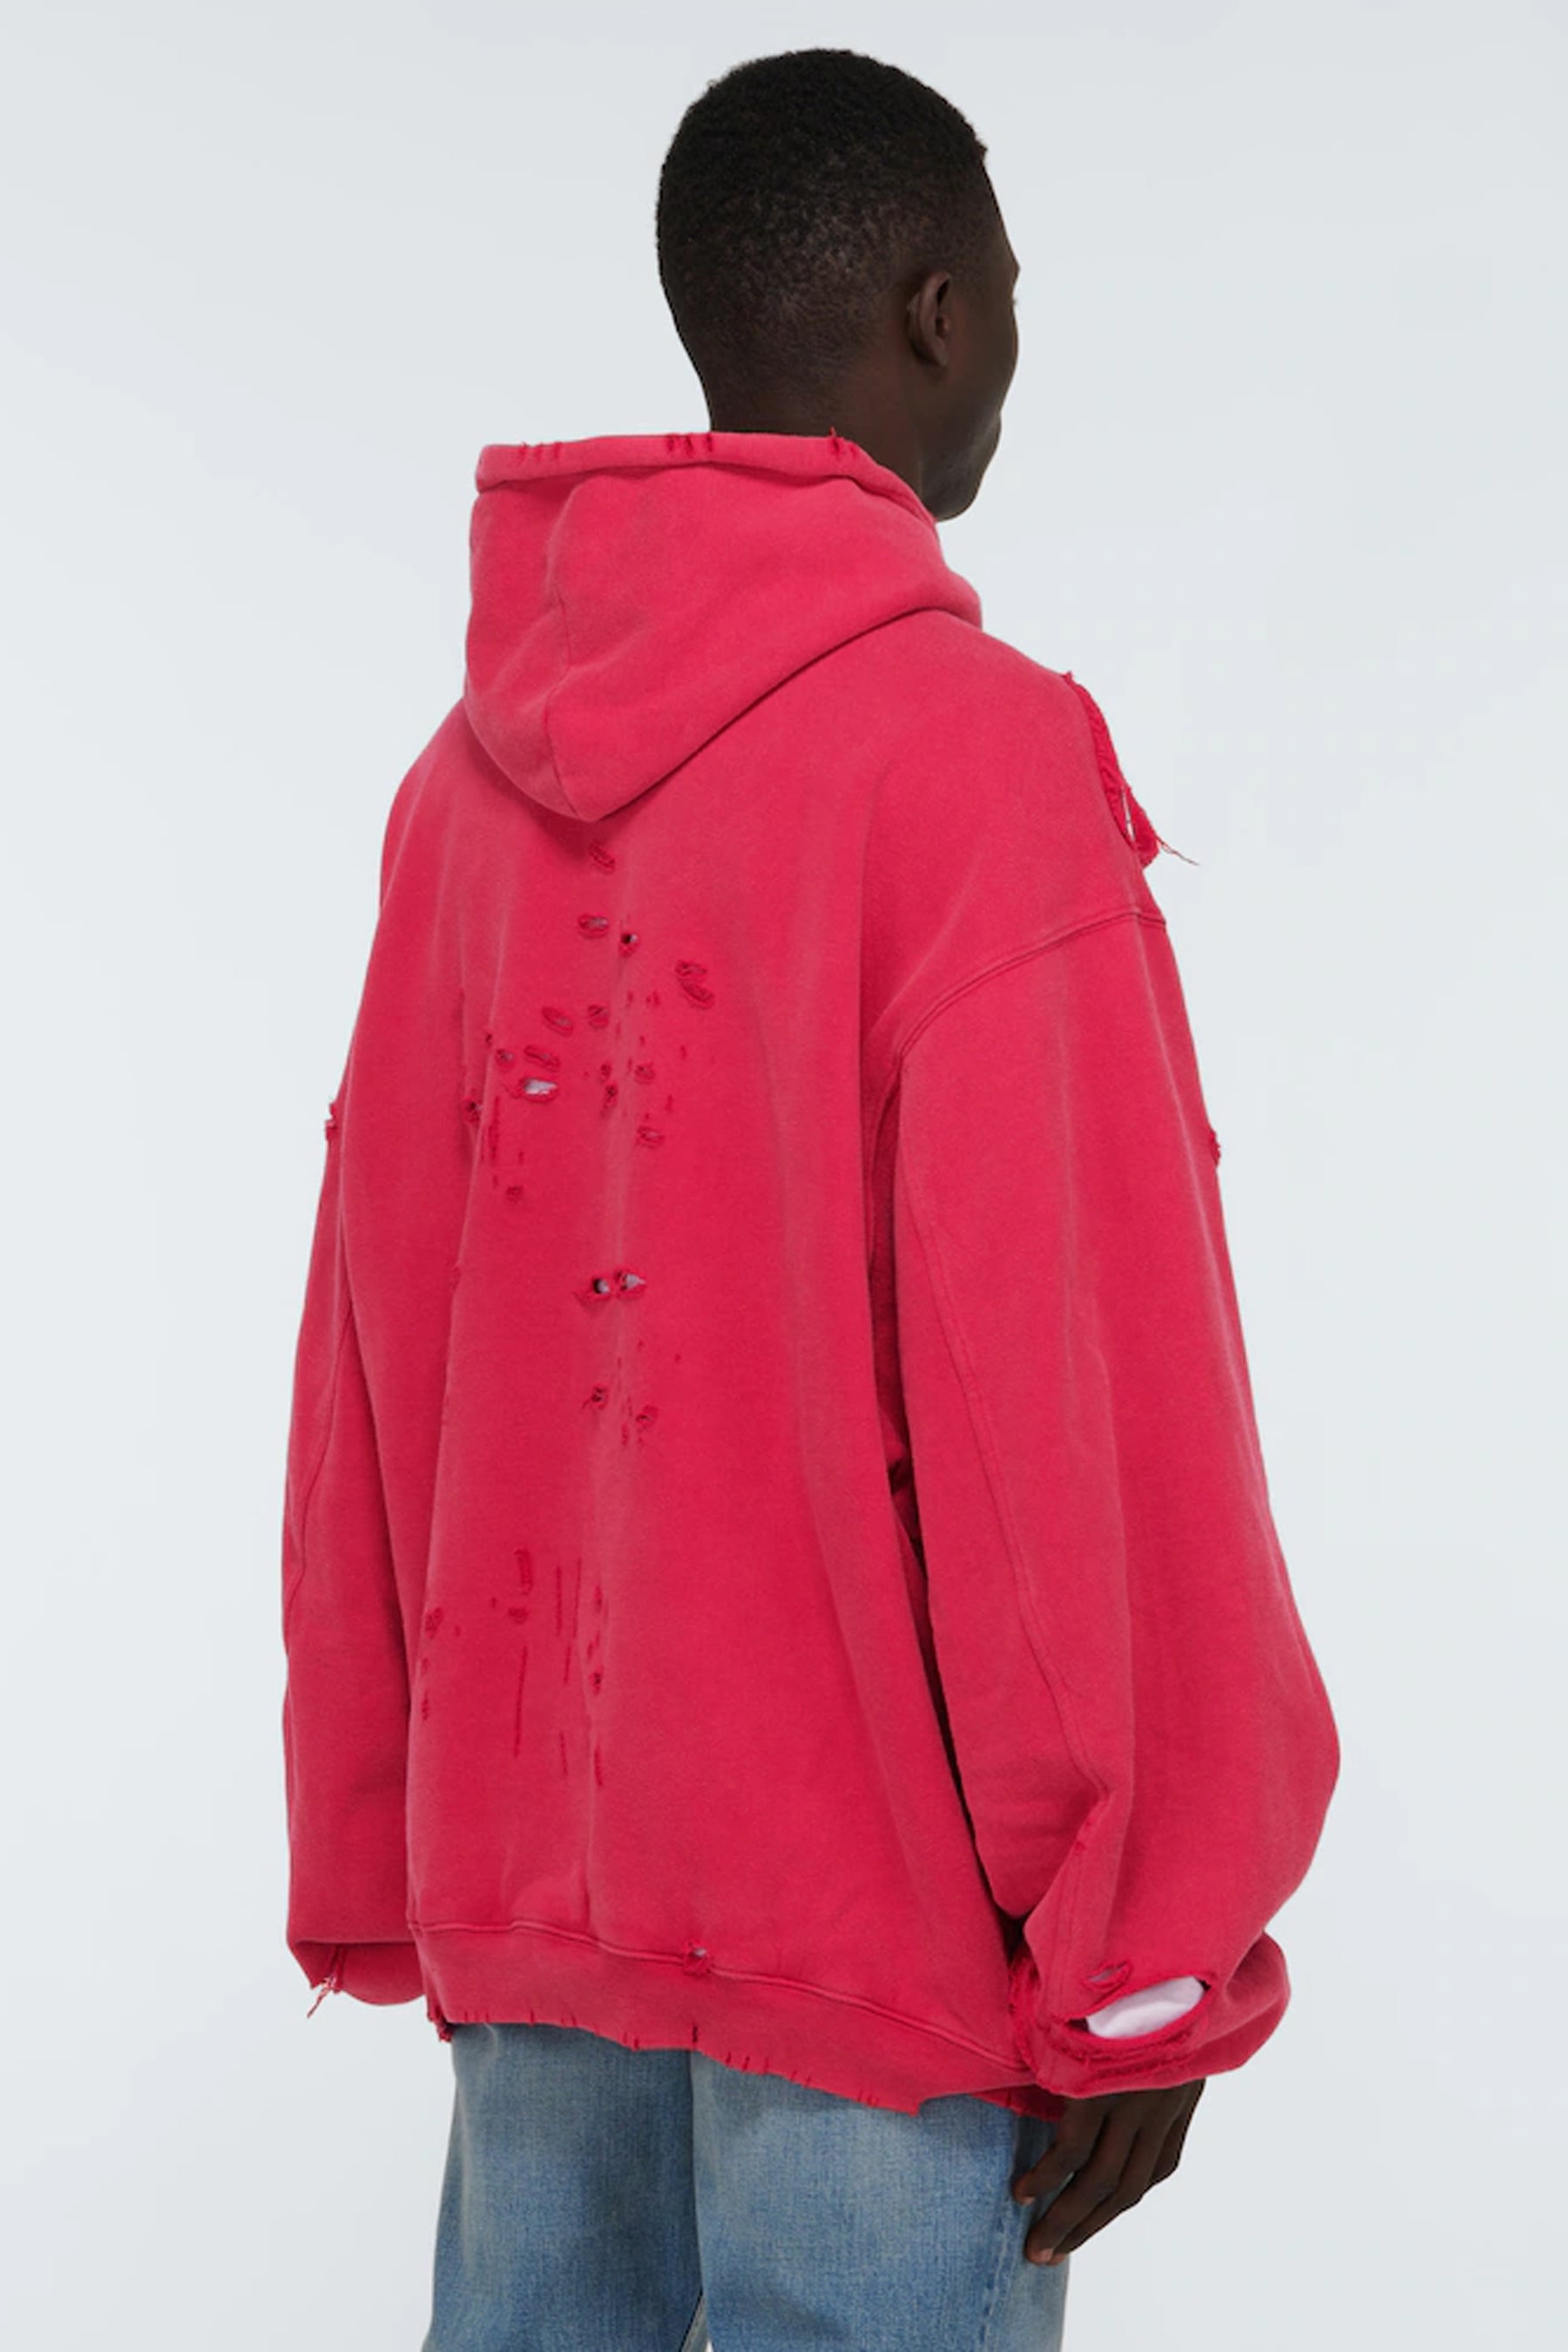 BALENCIAGA DESTROYED HOODIE IN RED